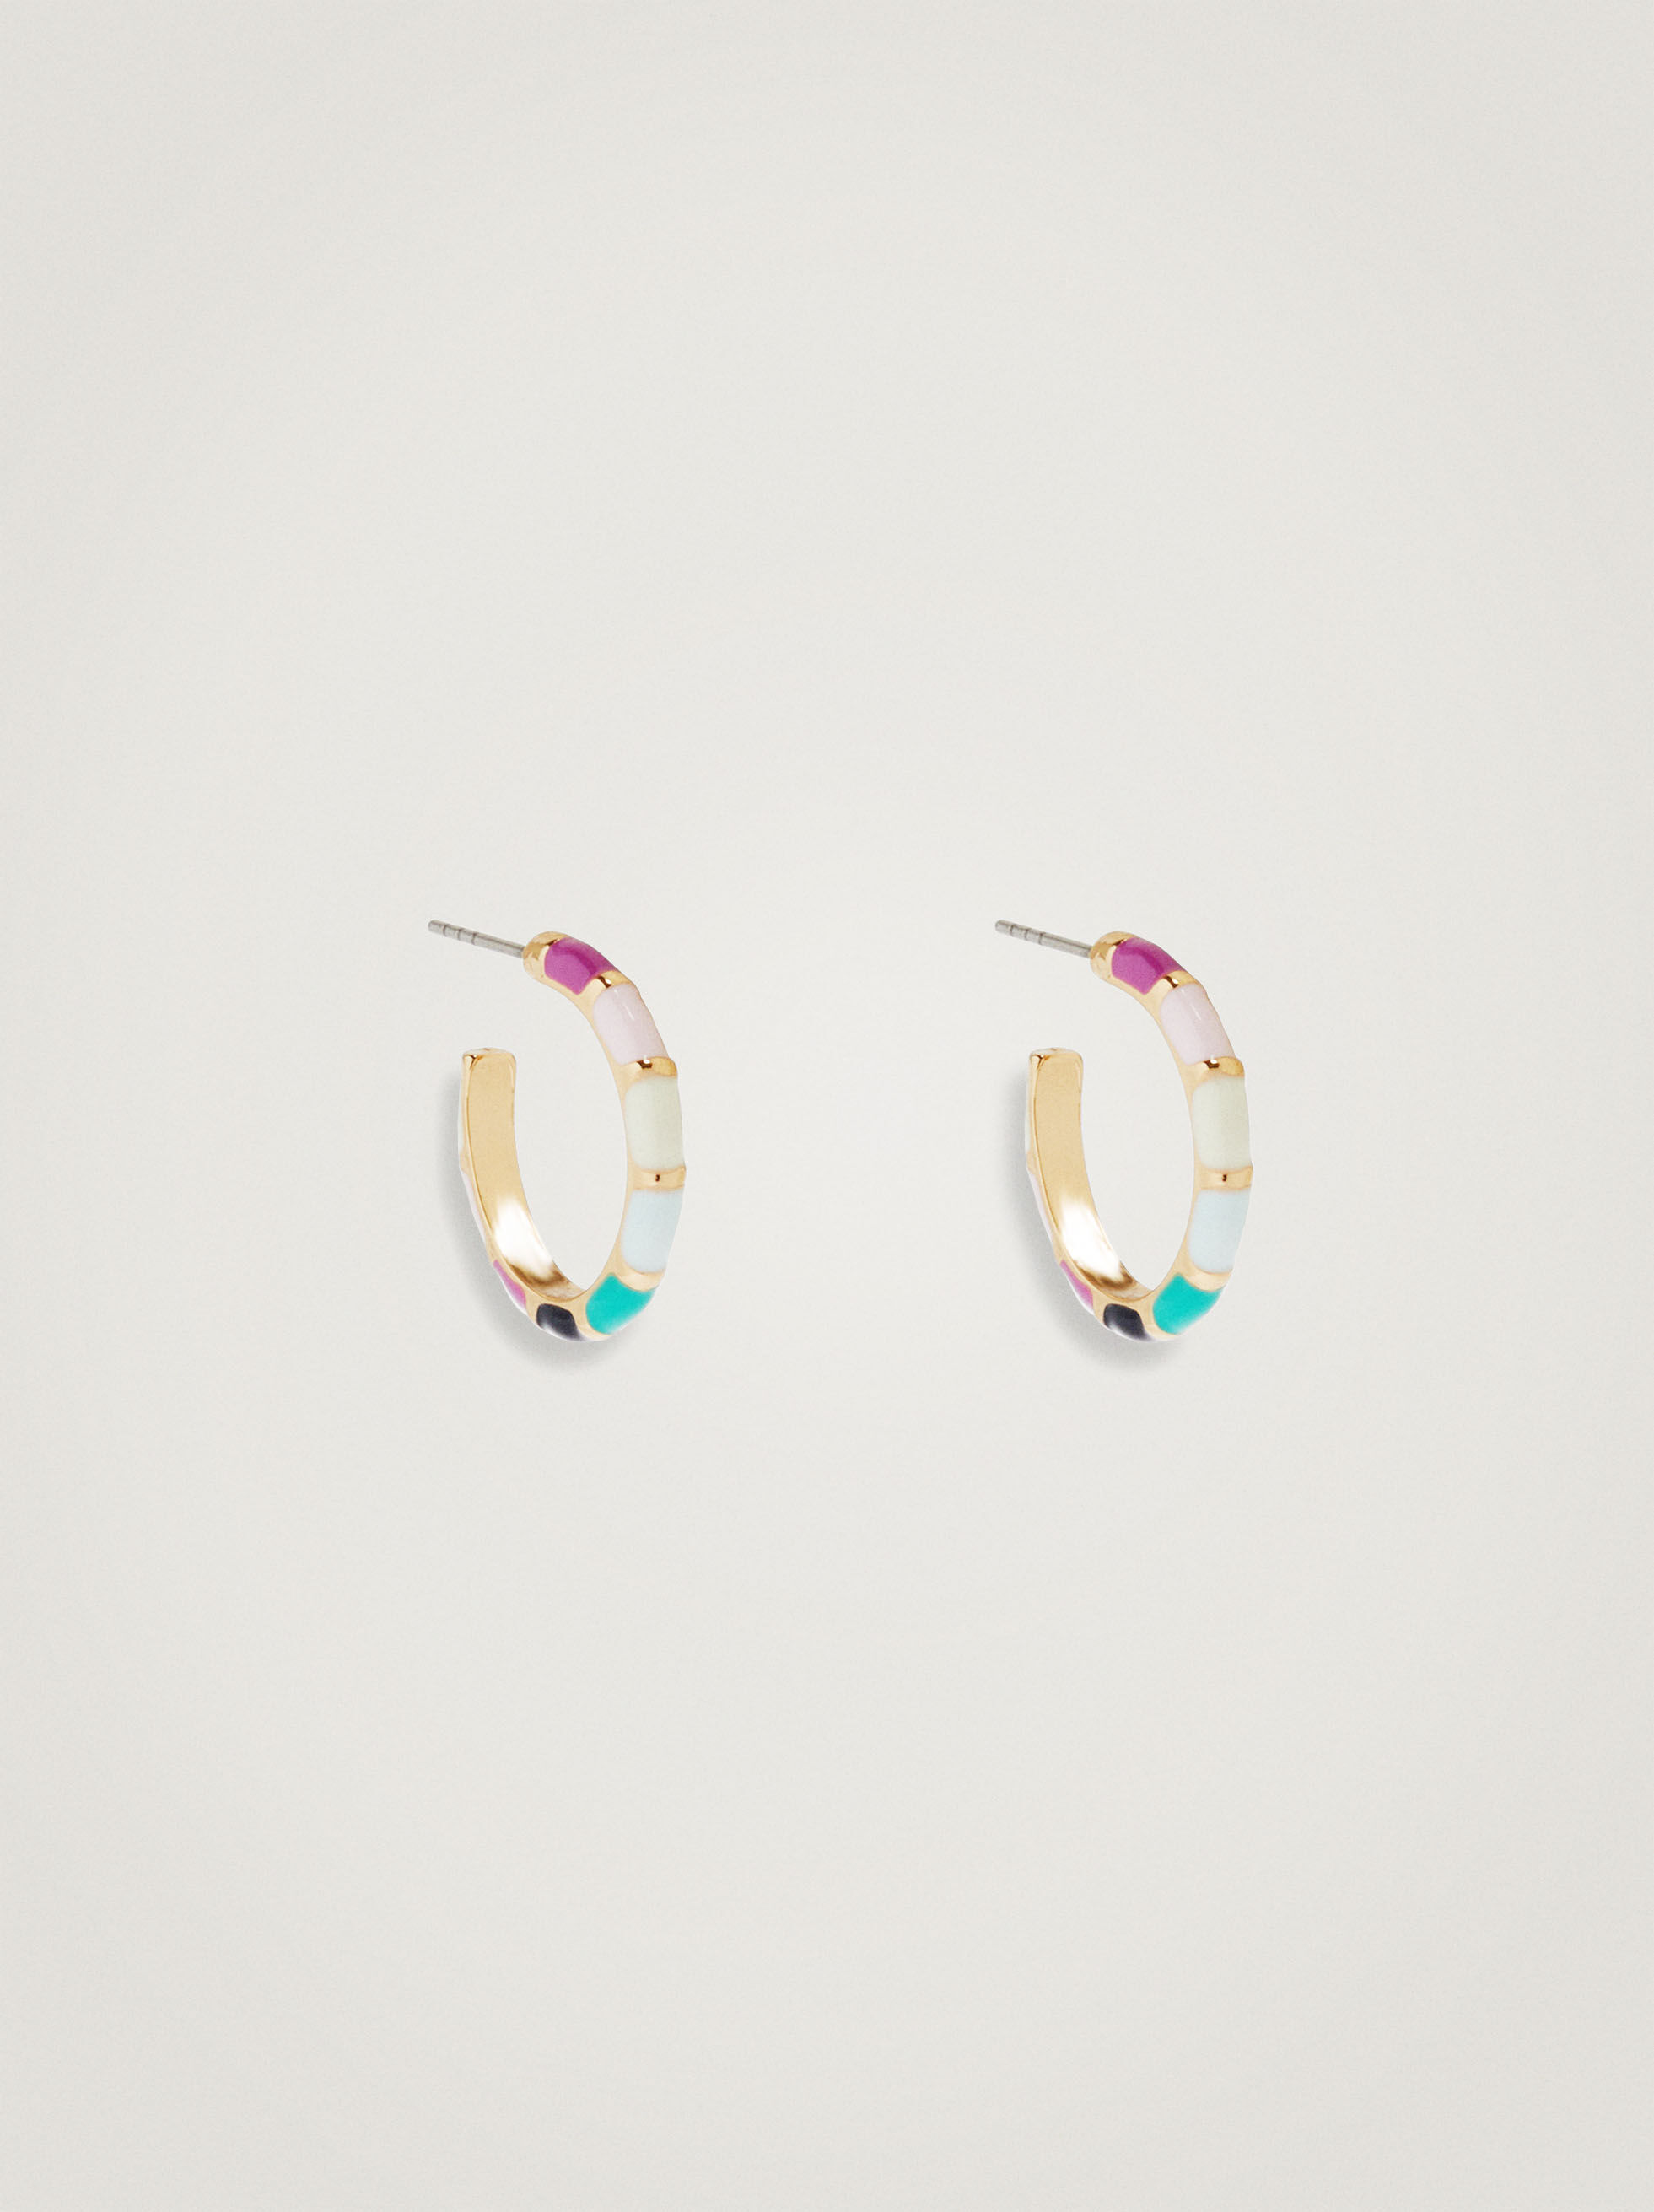 NEW Lucite Acrylic Medium Wide Hoop Earrings from France 